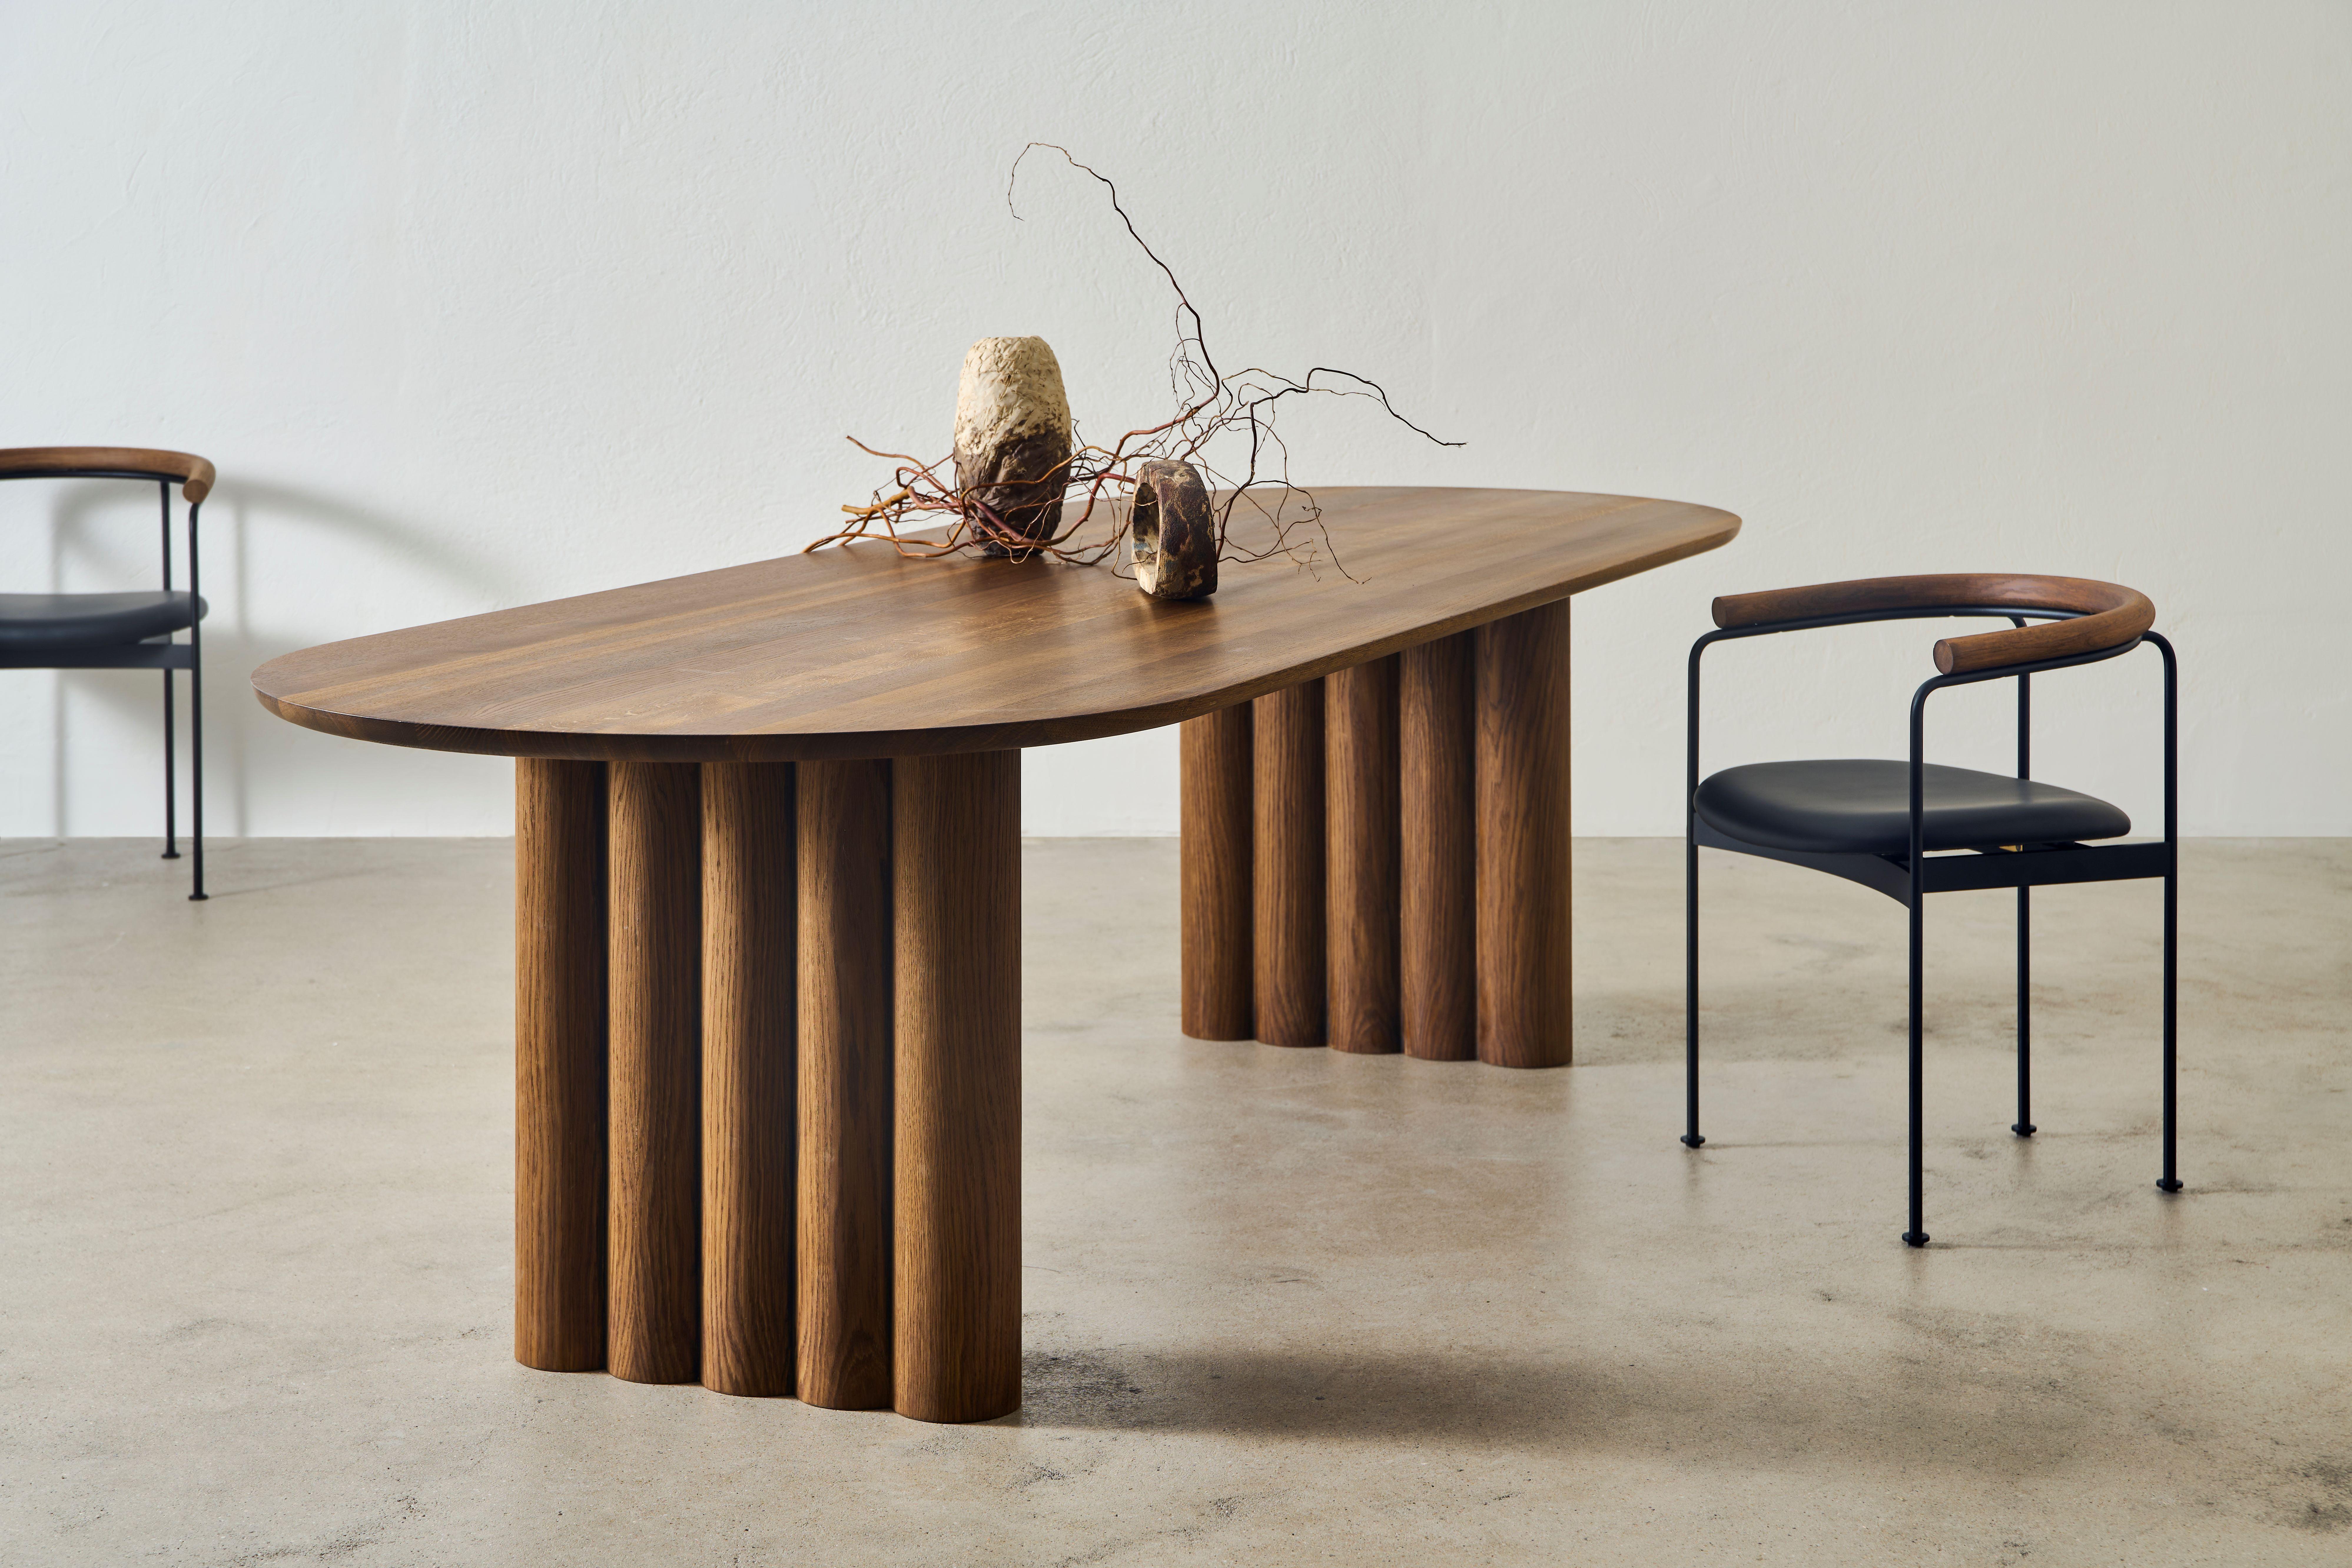 PLUSH dining table, oval, 340 cm.
Solid wood table top and legs. Handmade in Denmark. 
Signed by Jacob Plejdrup for DK3

Table's height: 72 or 74 cm
Table top’s thickness: 30-40mm
Legs width: 130mm or 150mm

Table top dimensions:
– 200 x